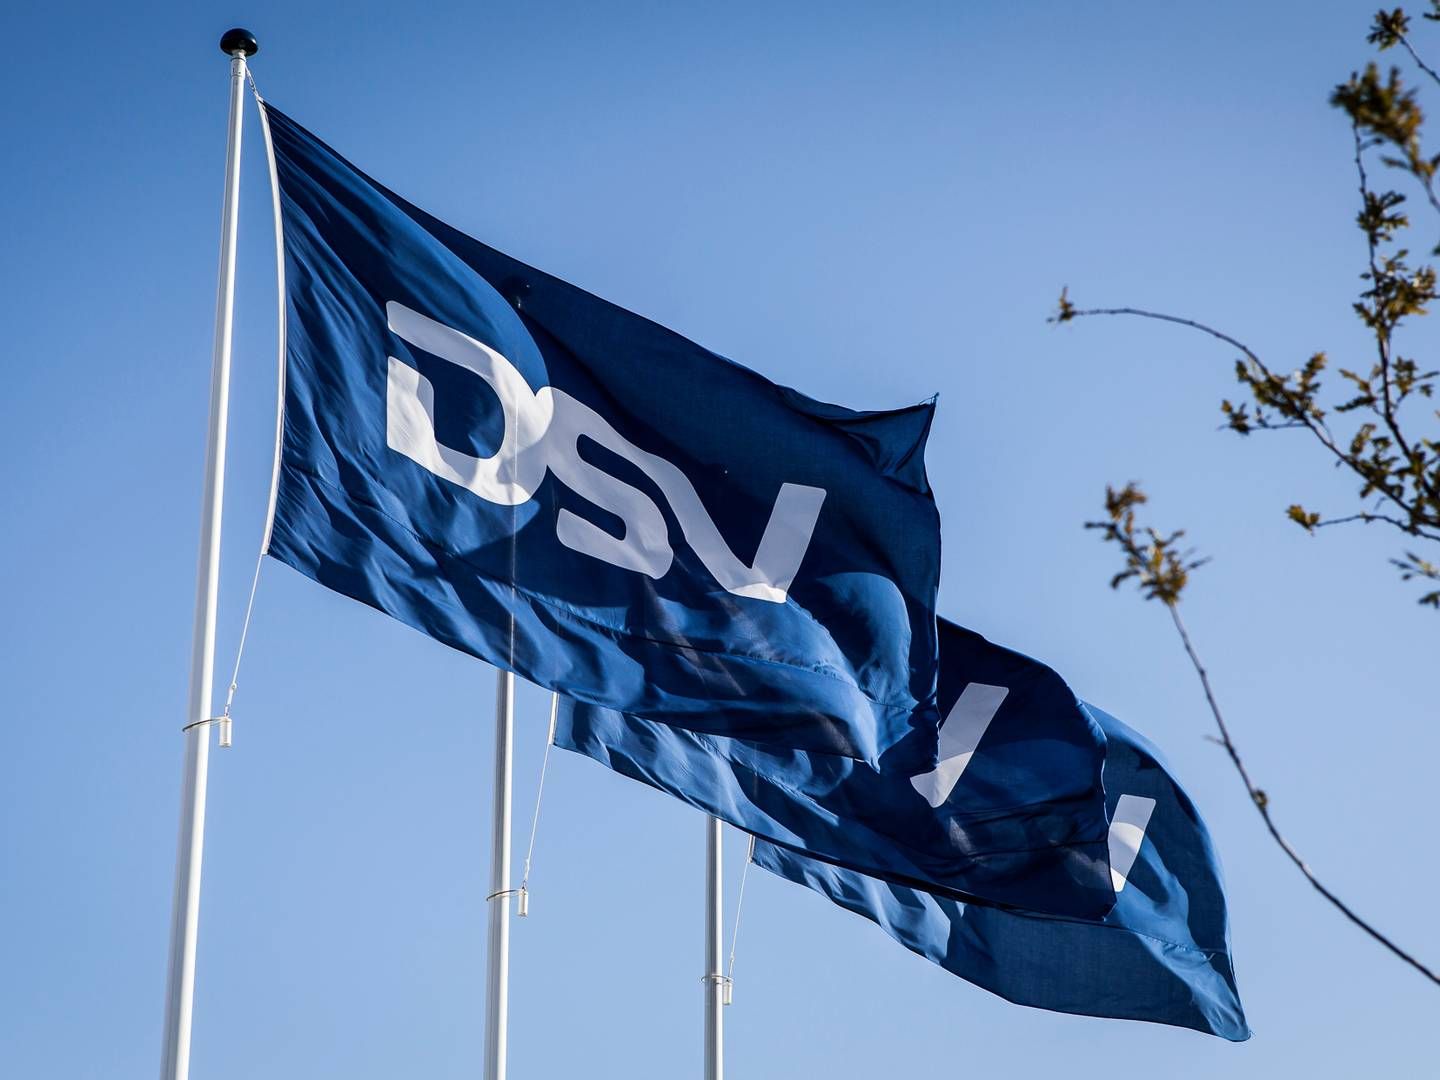 ”As a large Danish company that has the vast majority of our business outside Denmark and operates in more than 80 countries, we naturally have an ongoing dialog with relevant ministries and embassies,” says a spokeperson from DSV to ShippingWatch. | Photo: Dsv